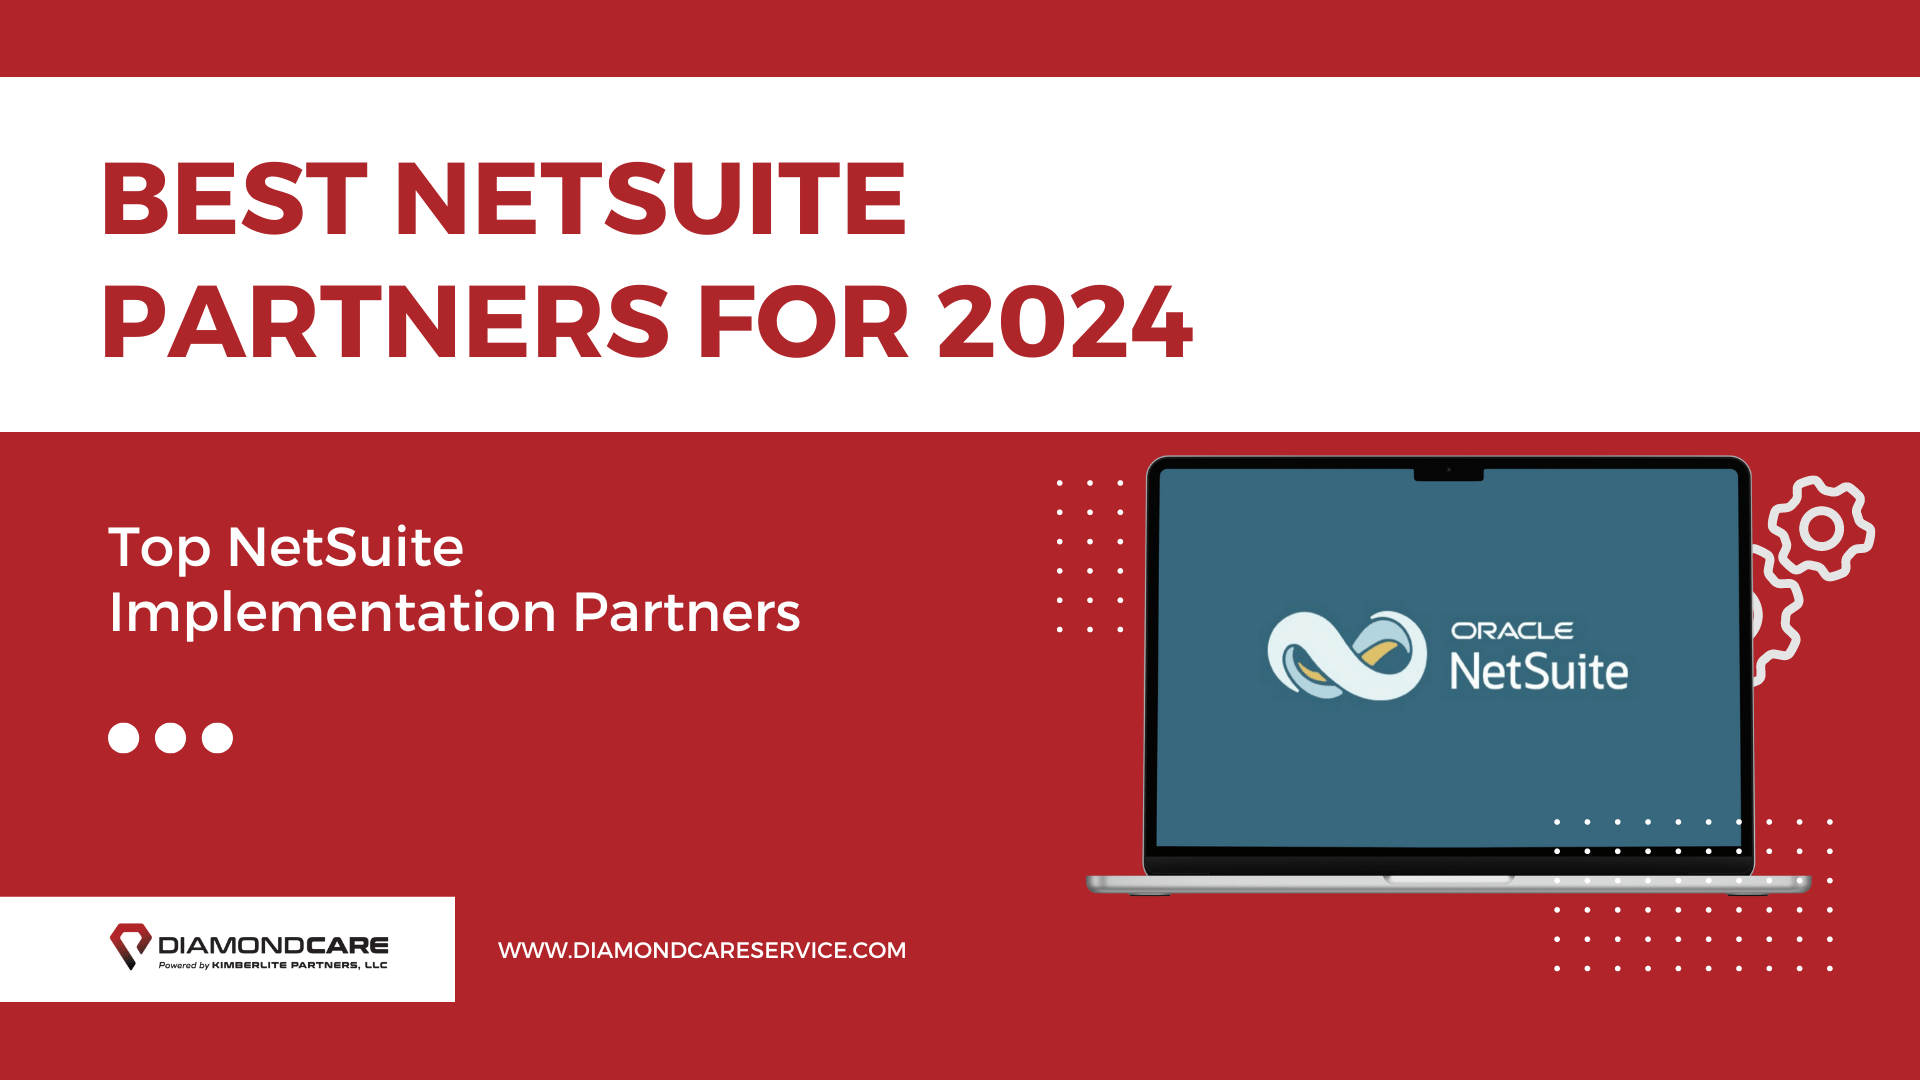 Top NetSuite Implementation Partners: Best NetSuite Partners for 2024